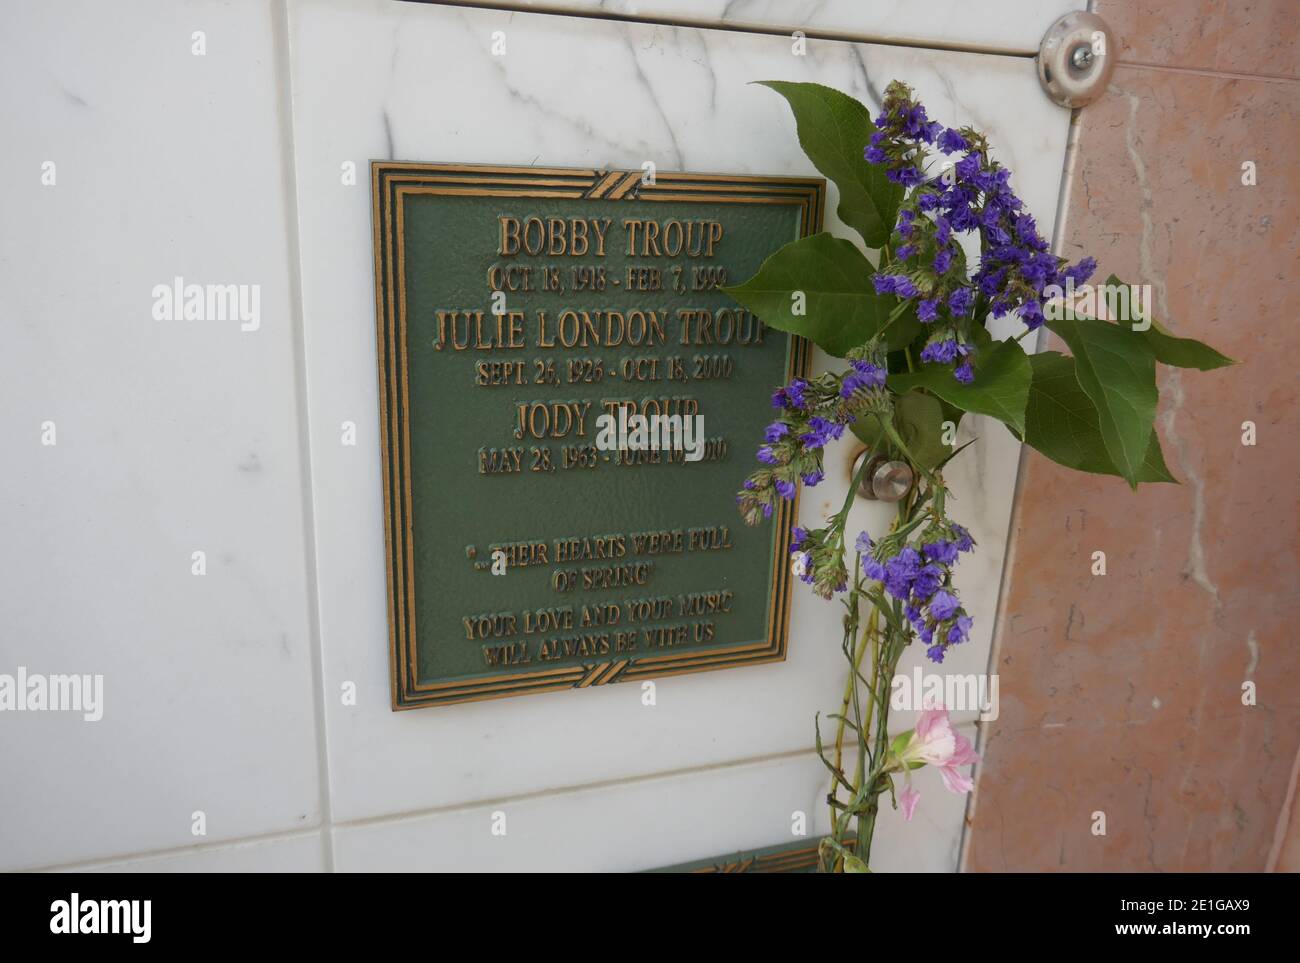 Los Angeles, California, USA 29th December 2020 A general view of atmosphere of actor Bobby Troup's Grave and singer Julie London's grave at Forest Lawn Hollywood Hills Memorial Park on December 29, 2020 in Los Angeles, California, USA. Photo by Barry King/Alamy Stock Photo Stock Photo